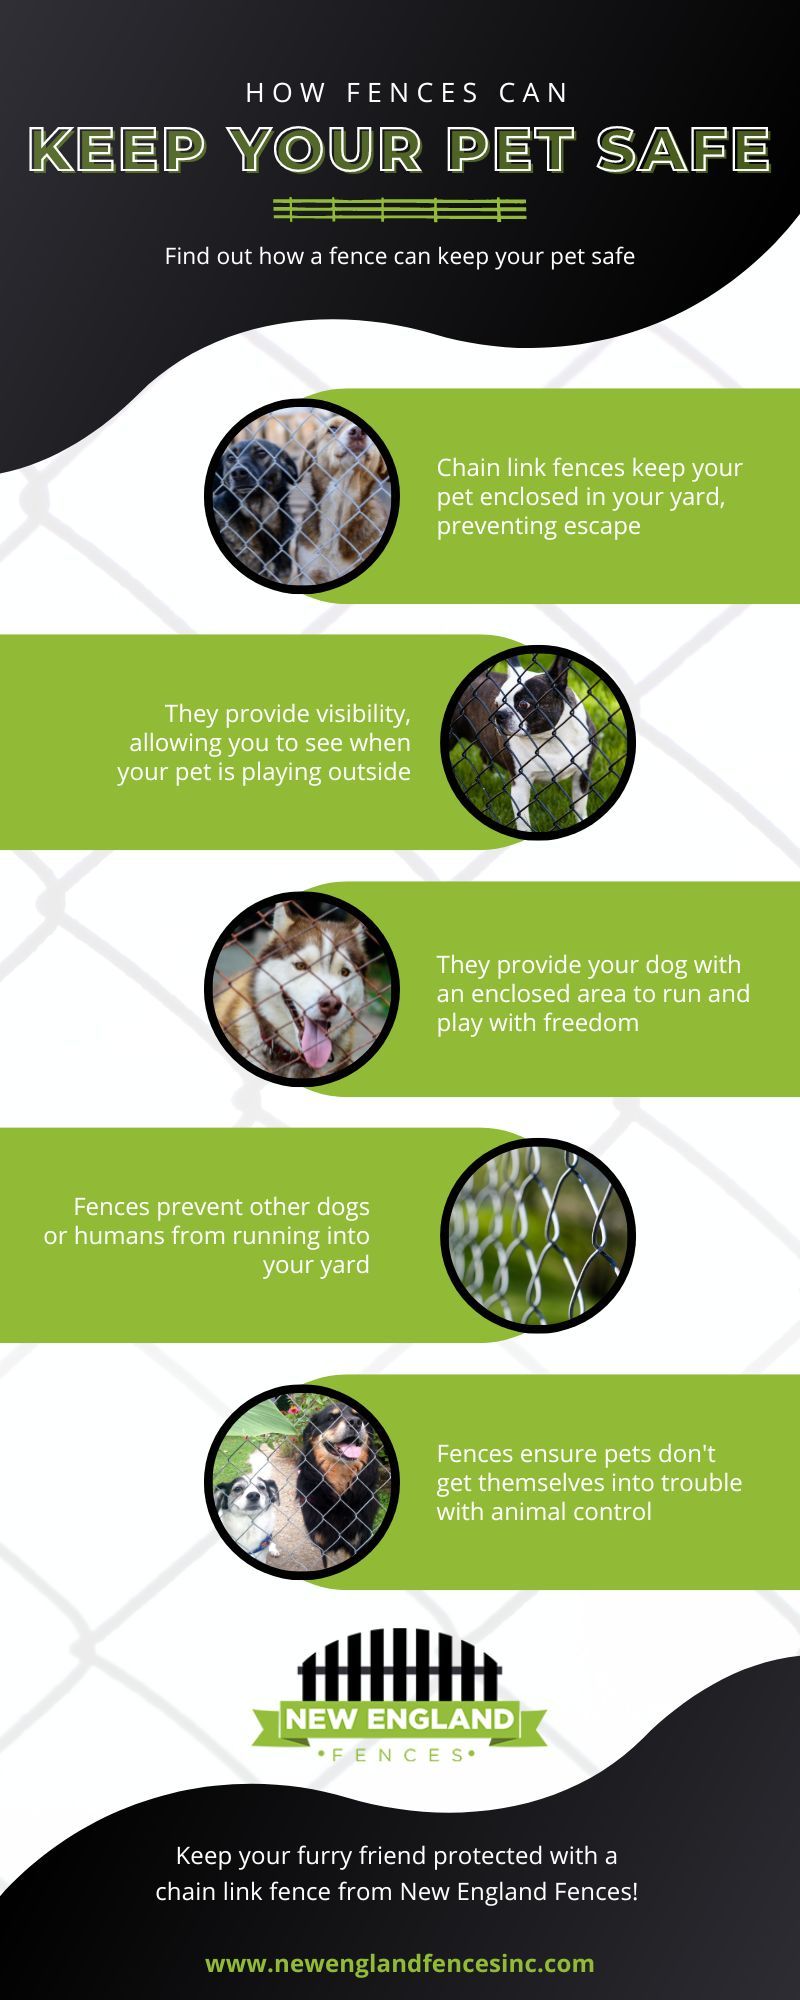 how fences can keep your pet safe infographic